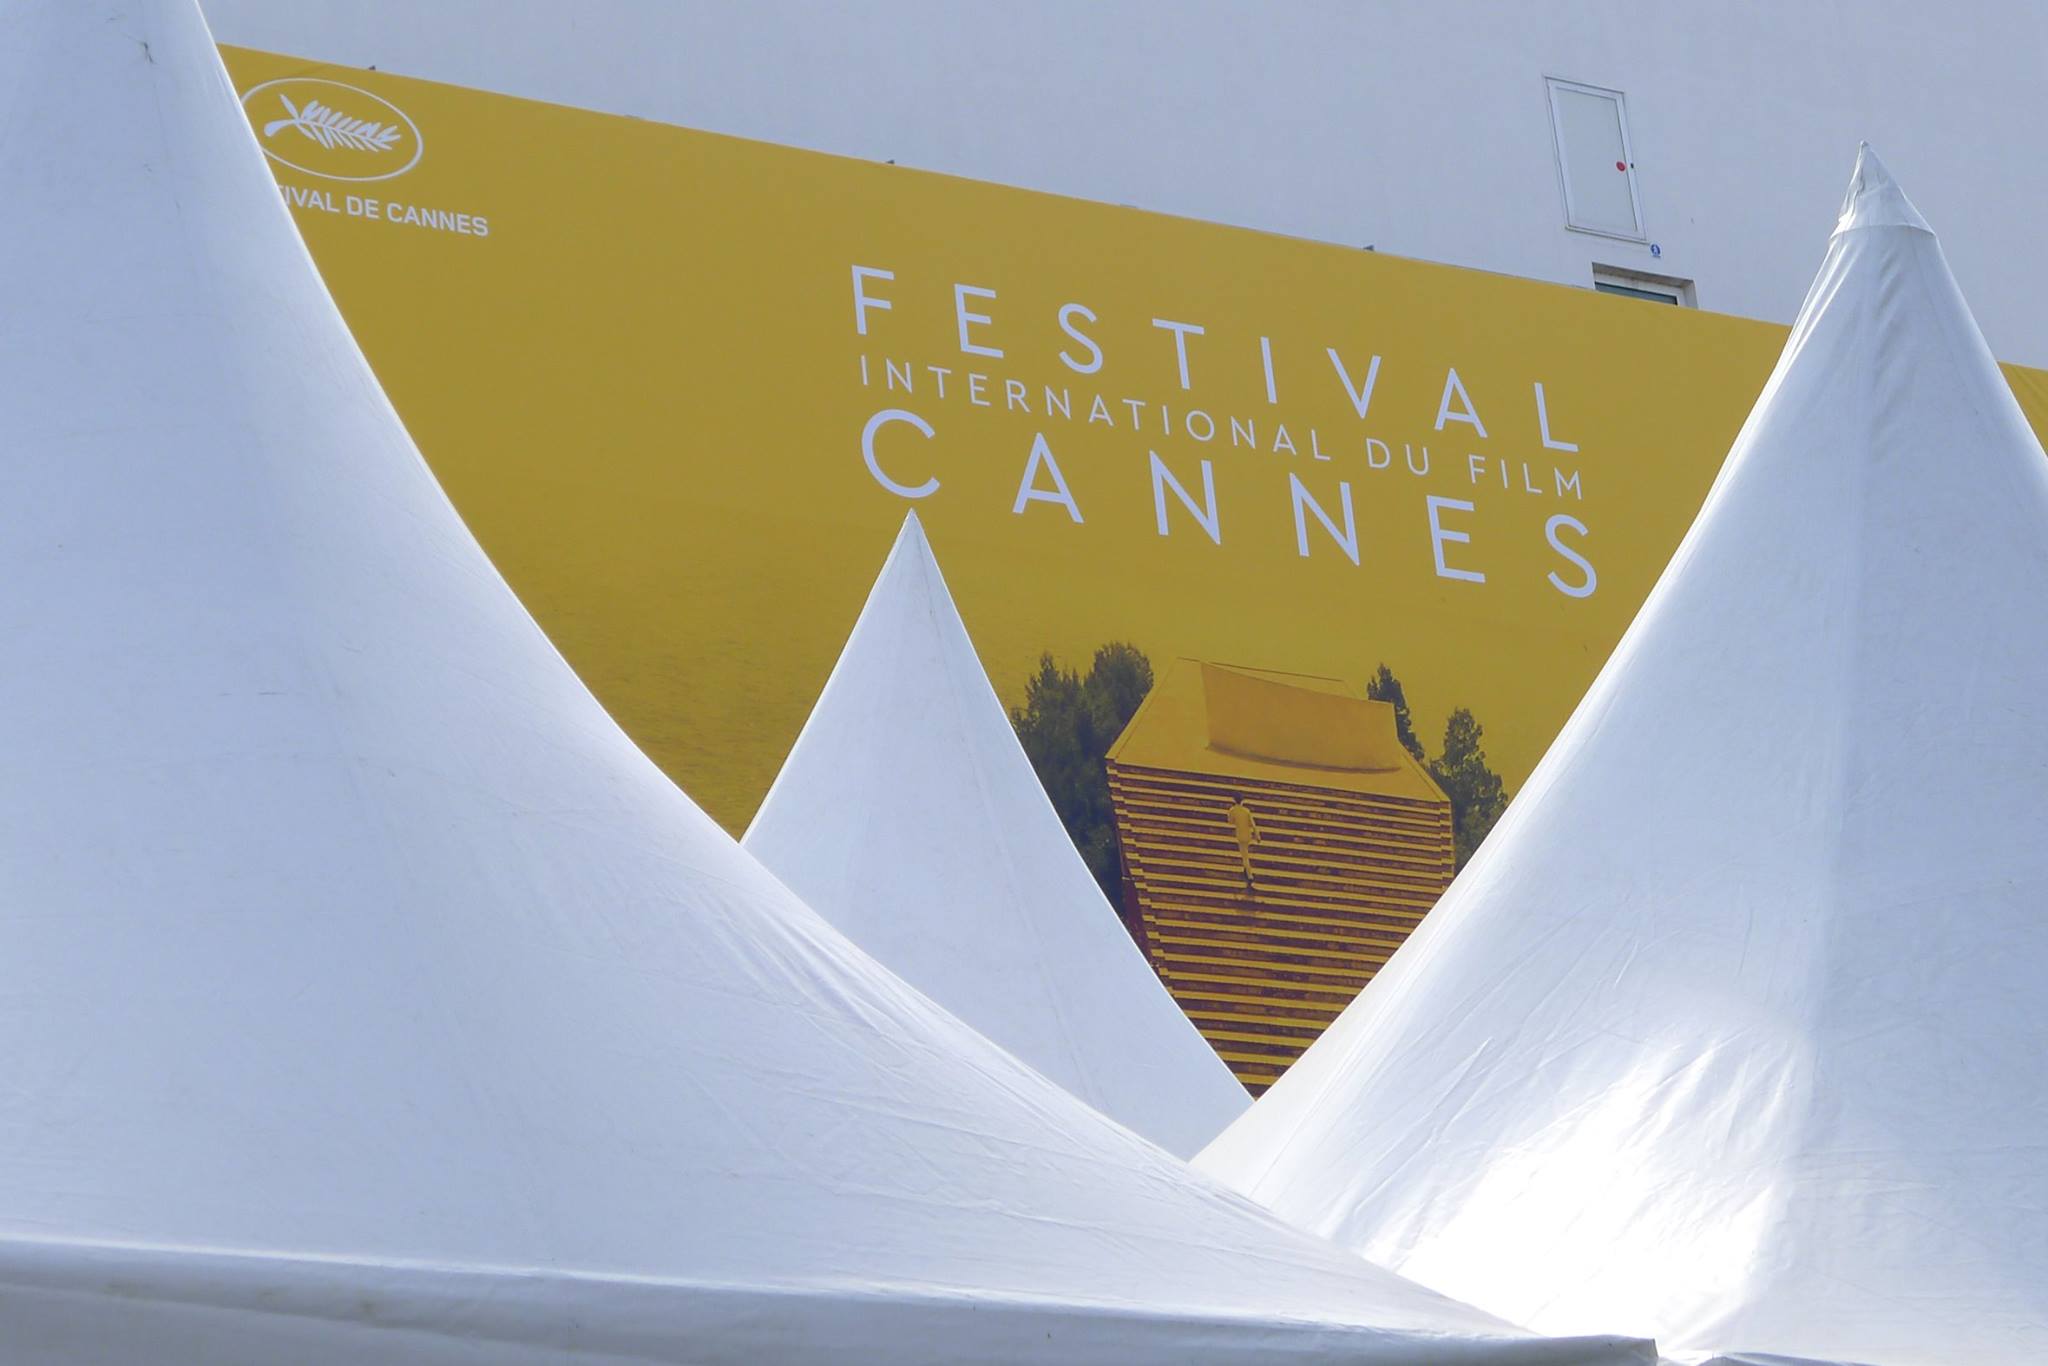 Internationales Festival in Cannes